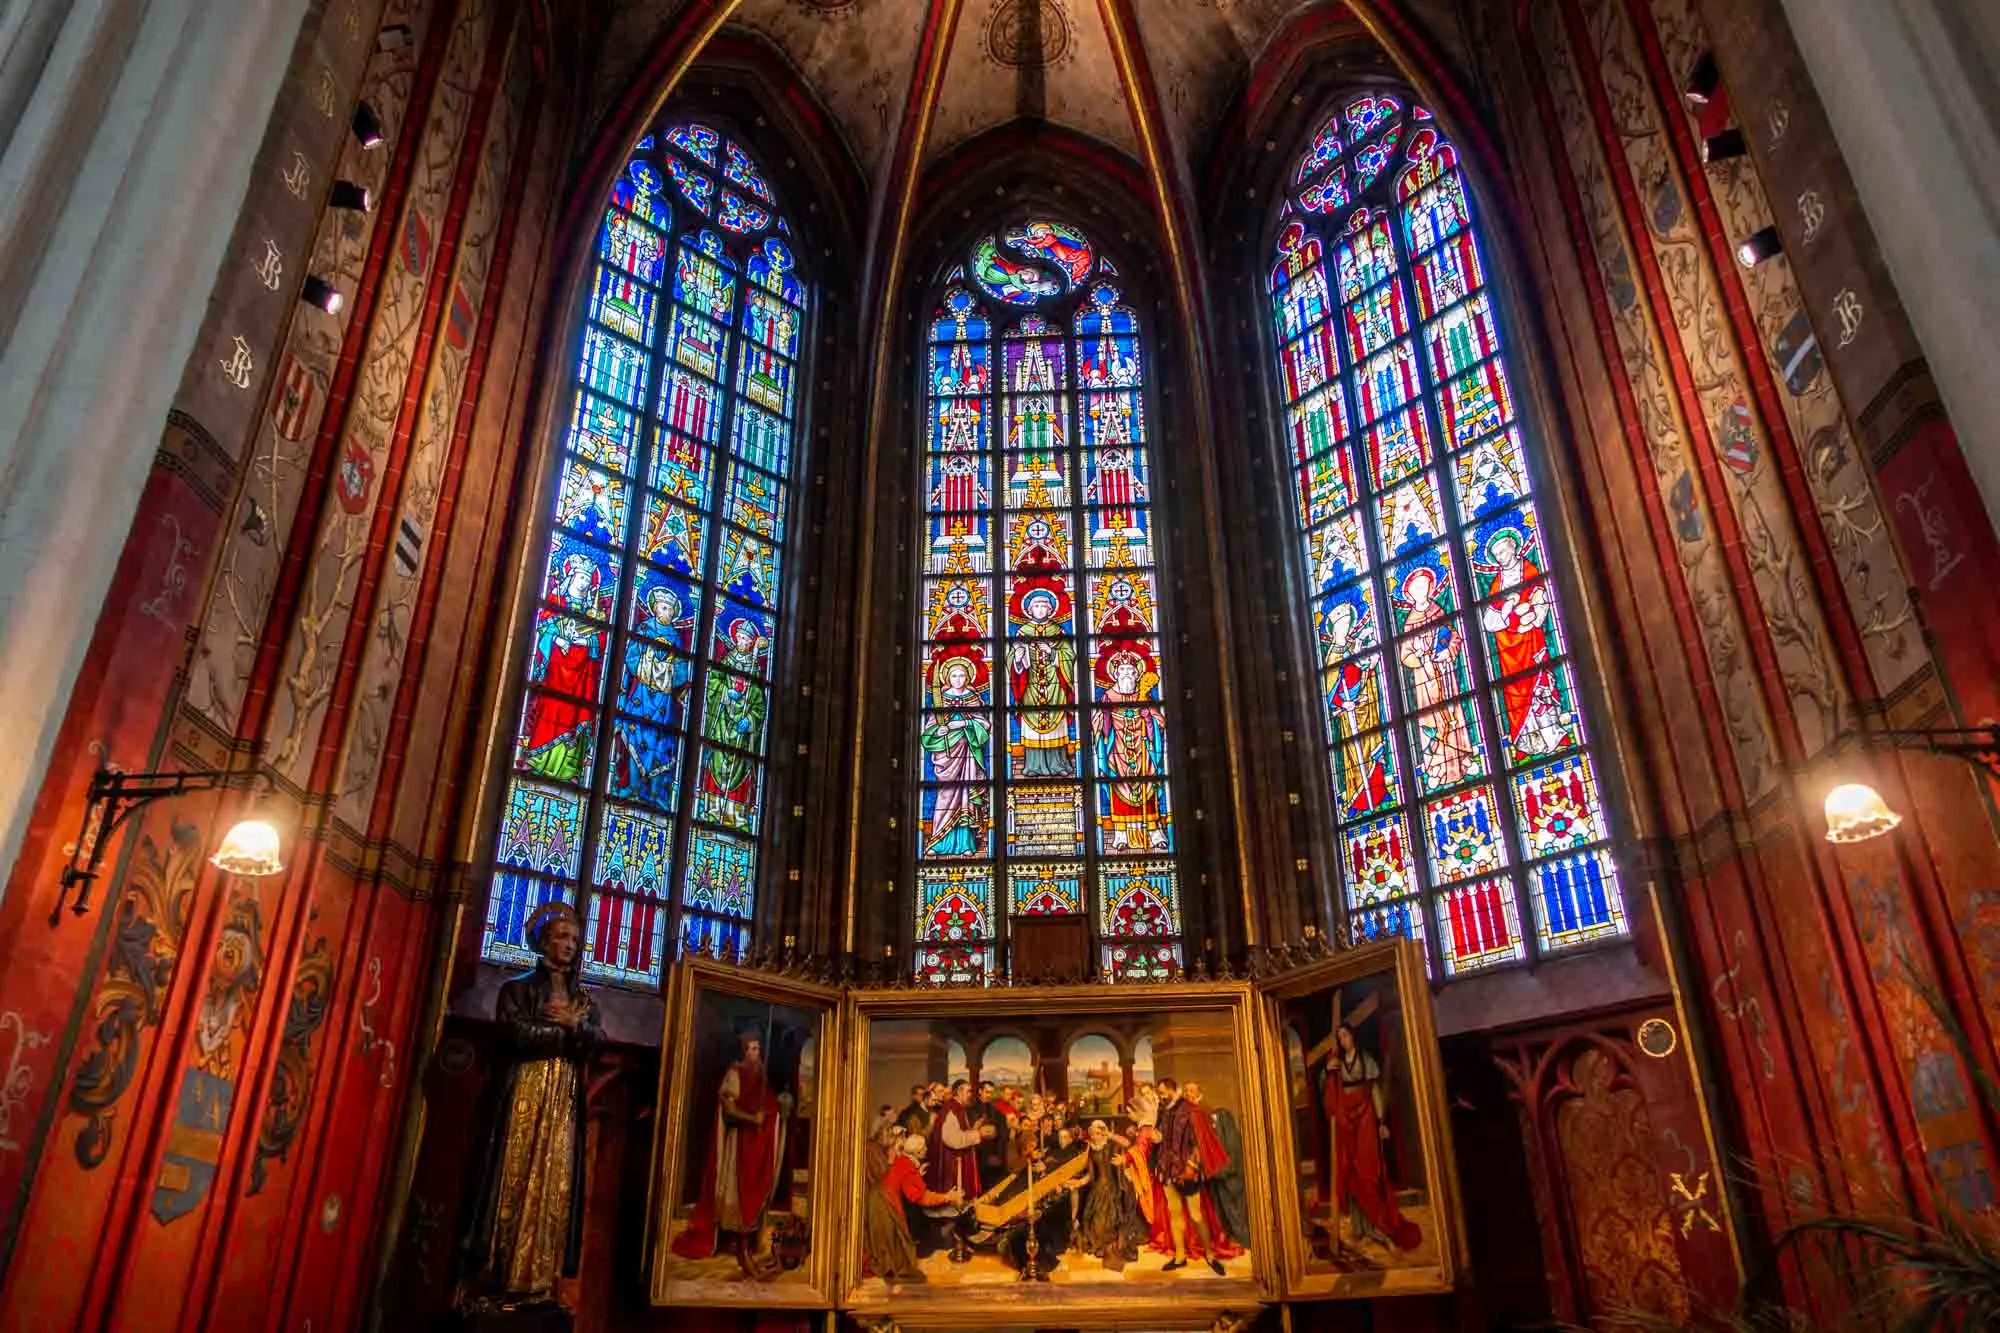 Stained glass and art in a cathedral